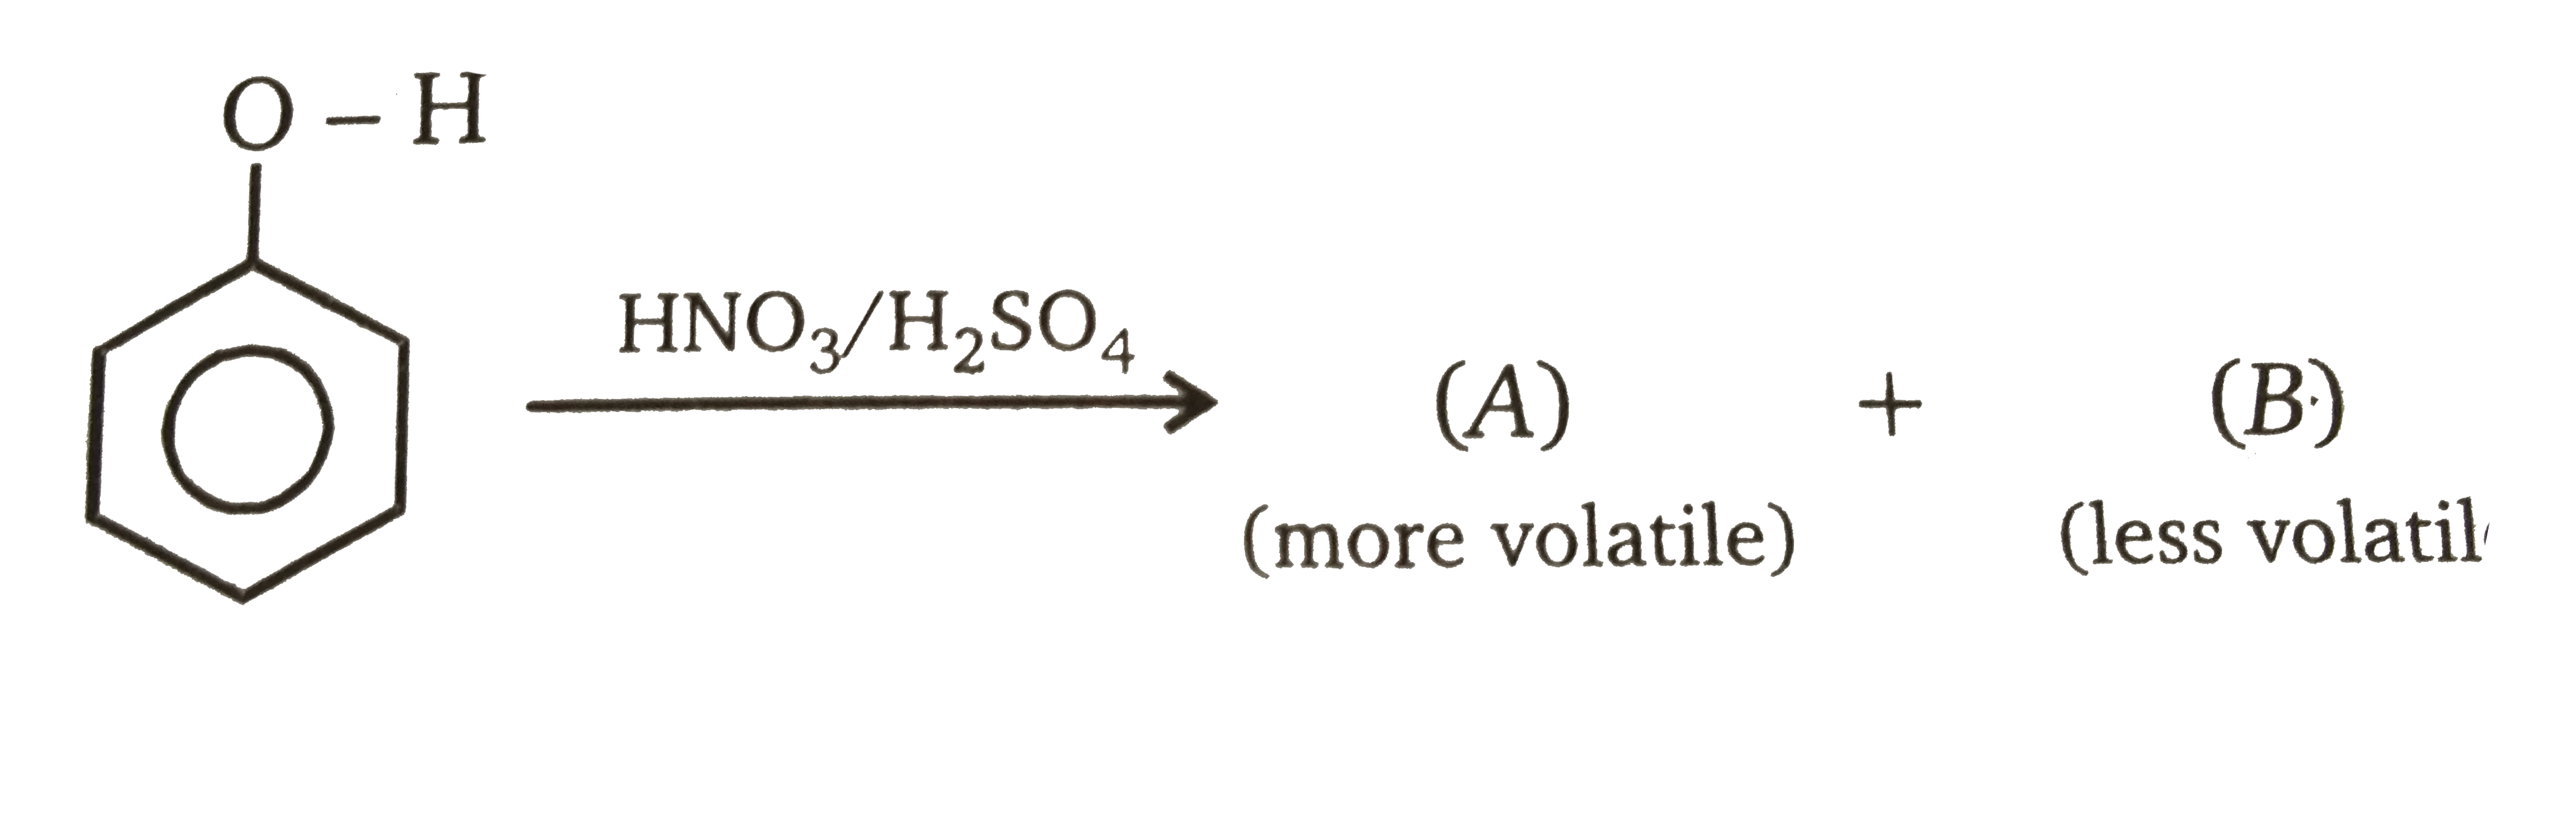 Product (A) of the above reaction is: